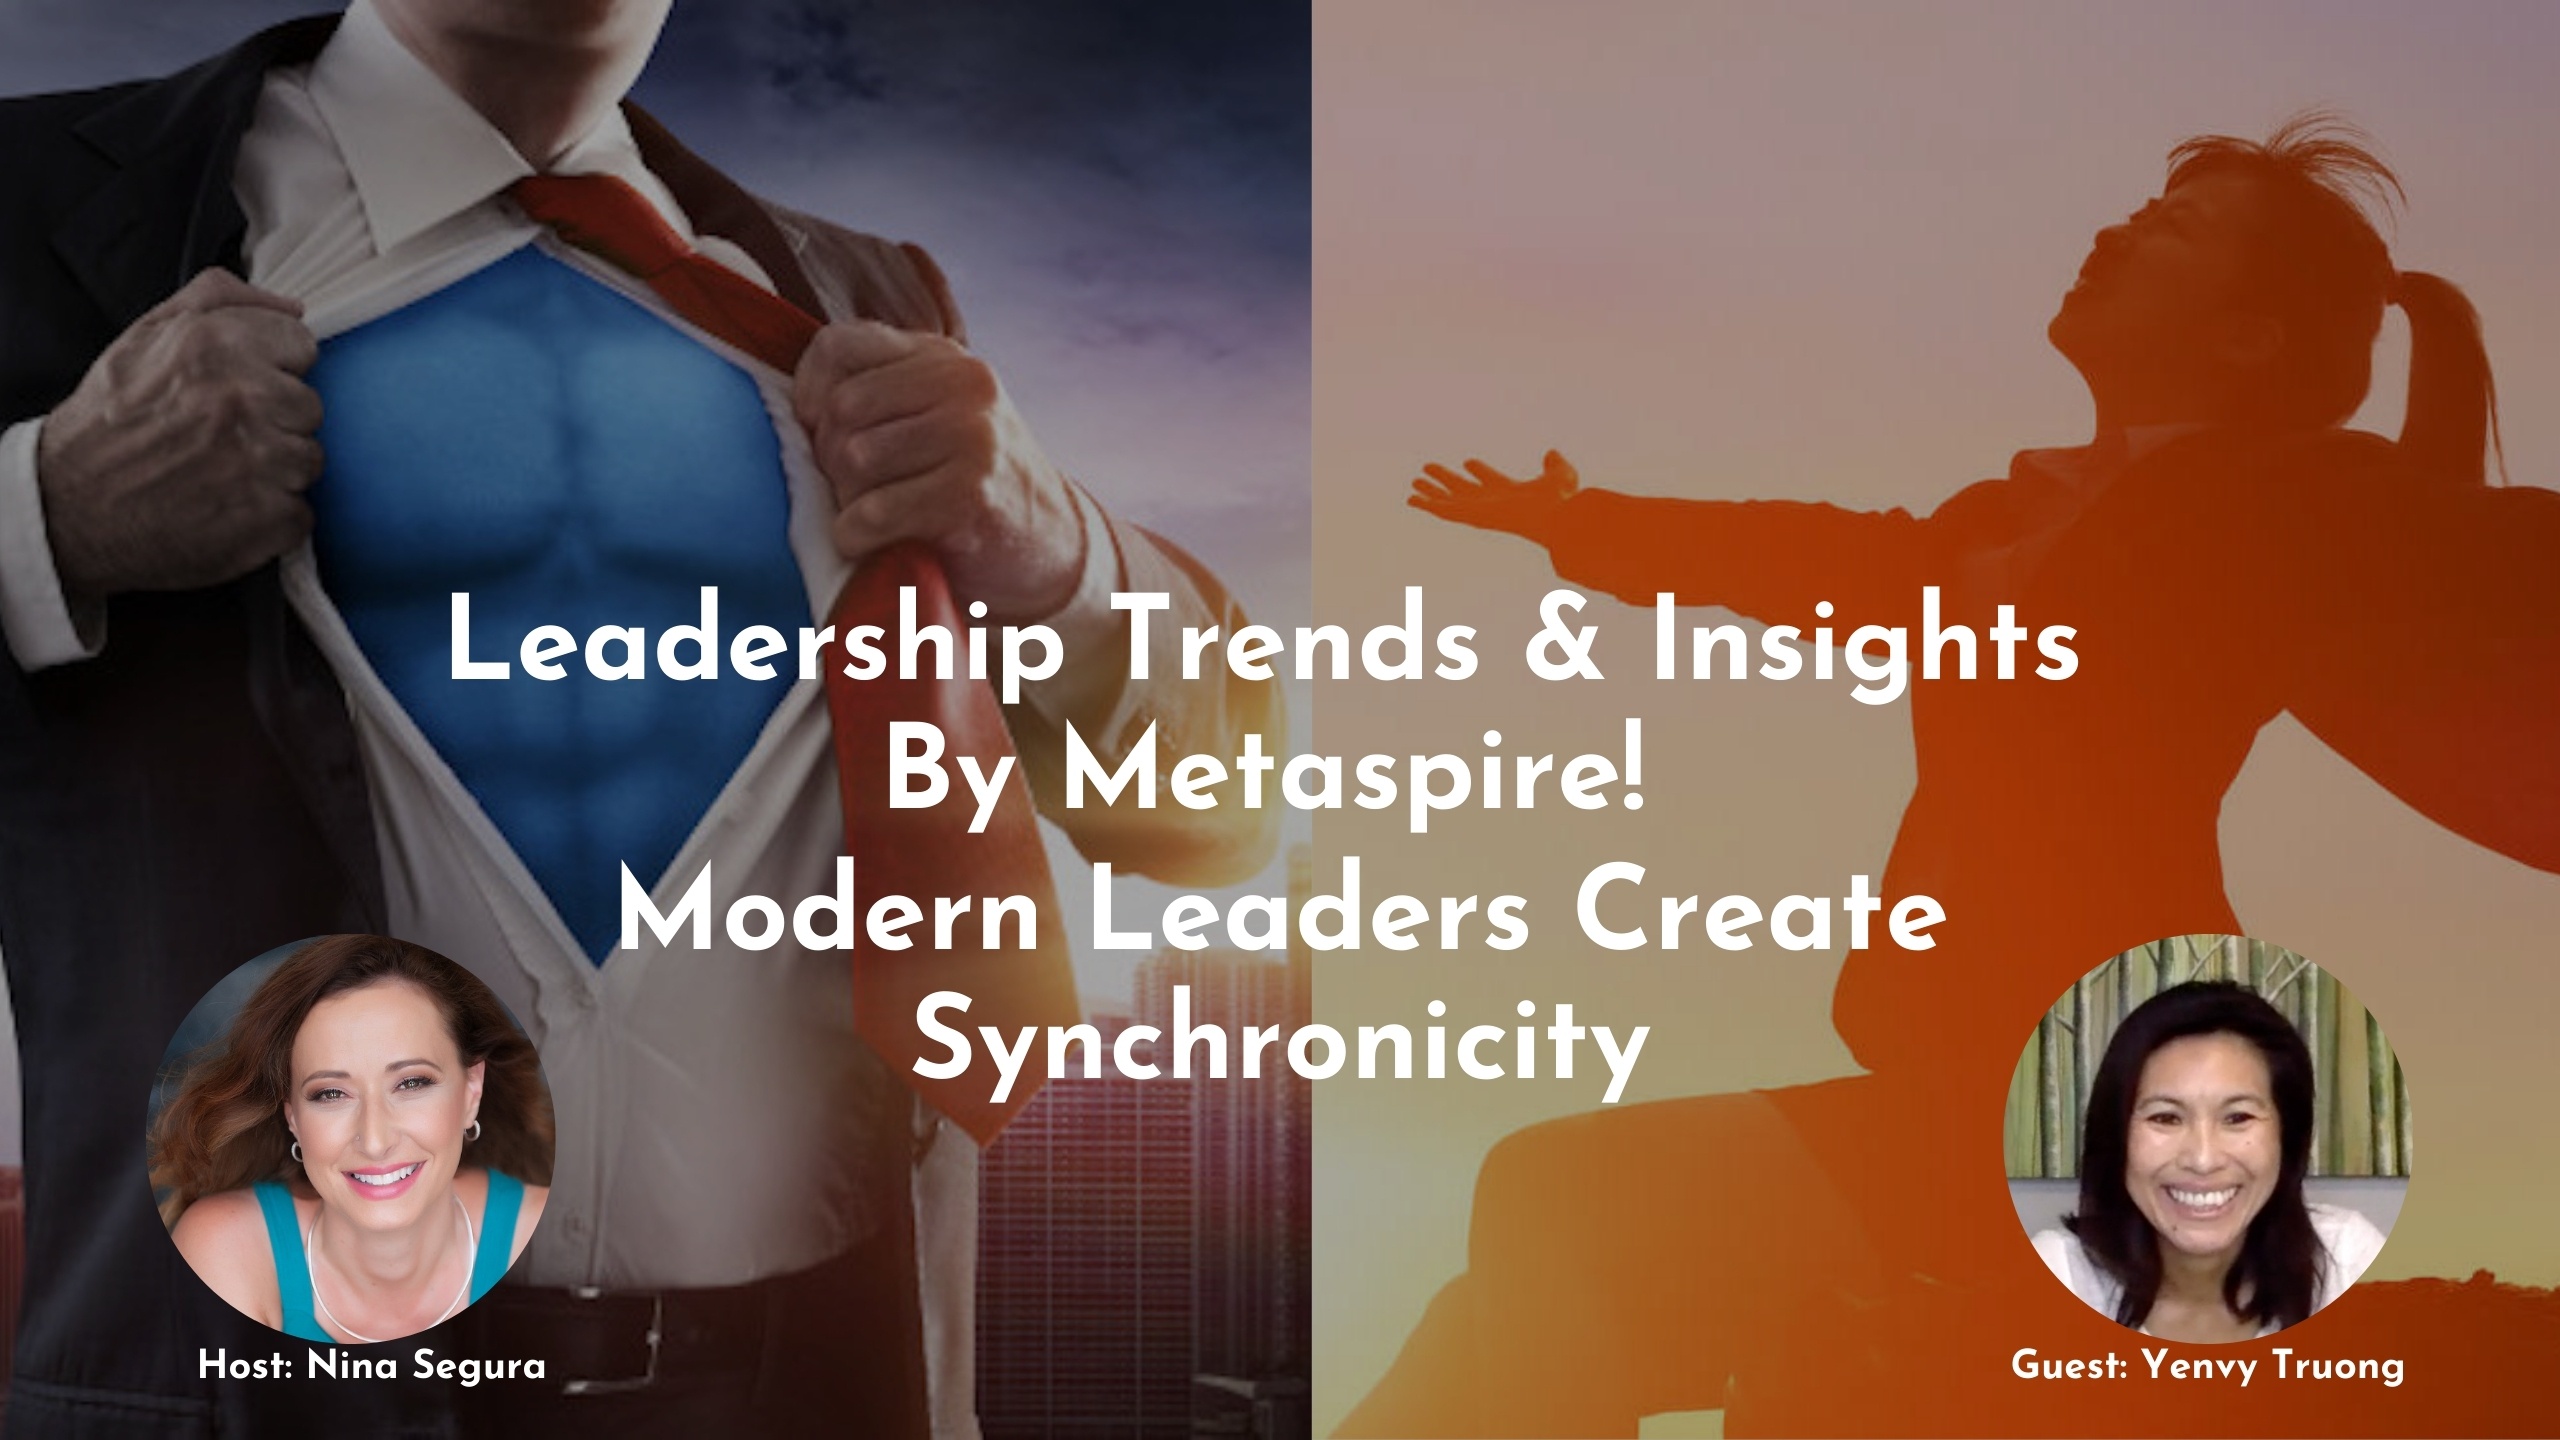 Leadership Trends & Insights Modern Leaders Create Synchronicity